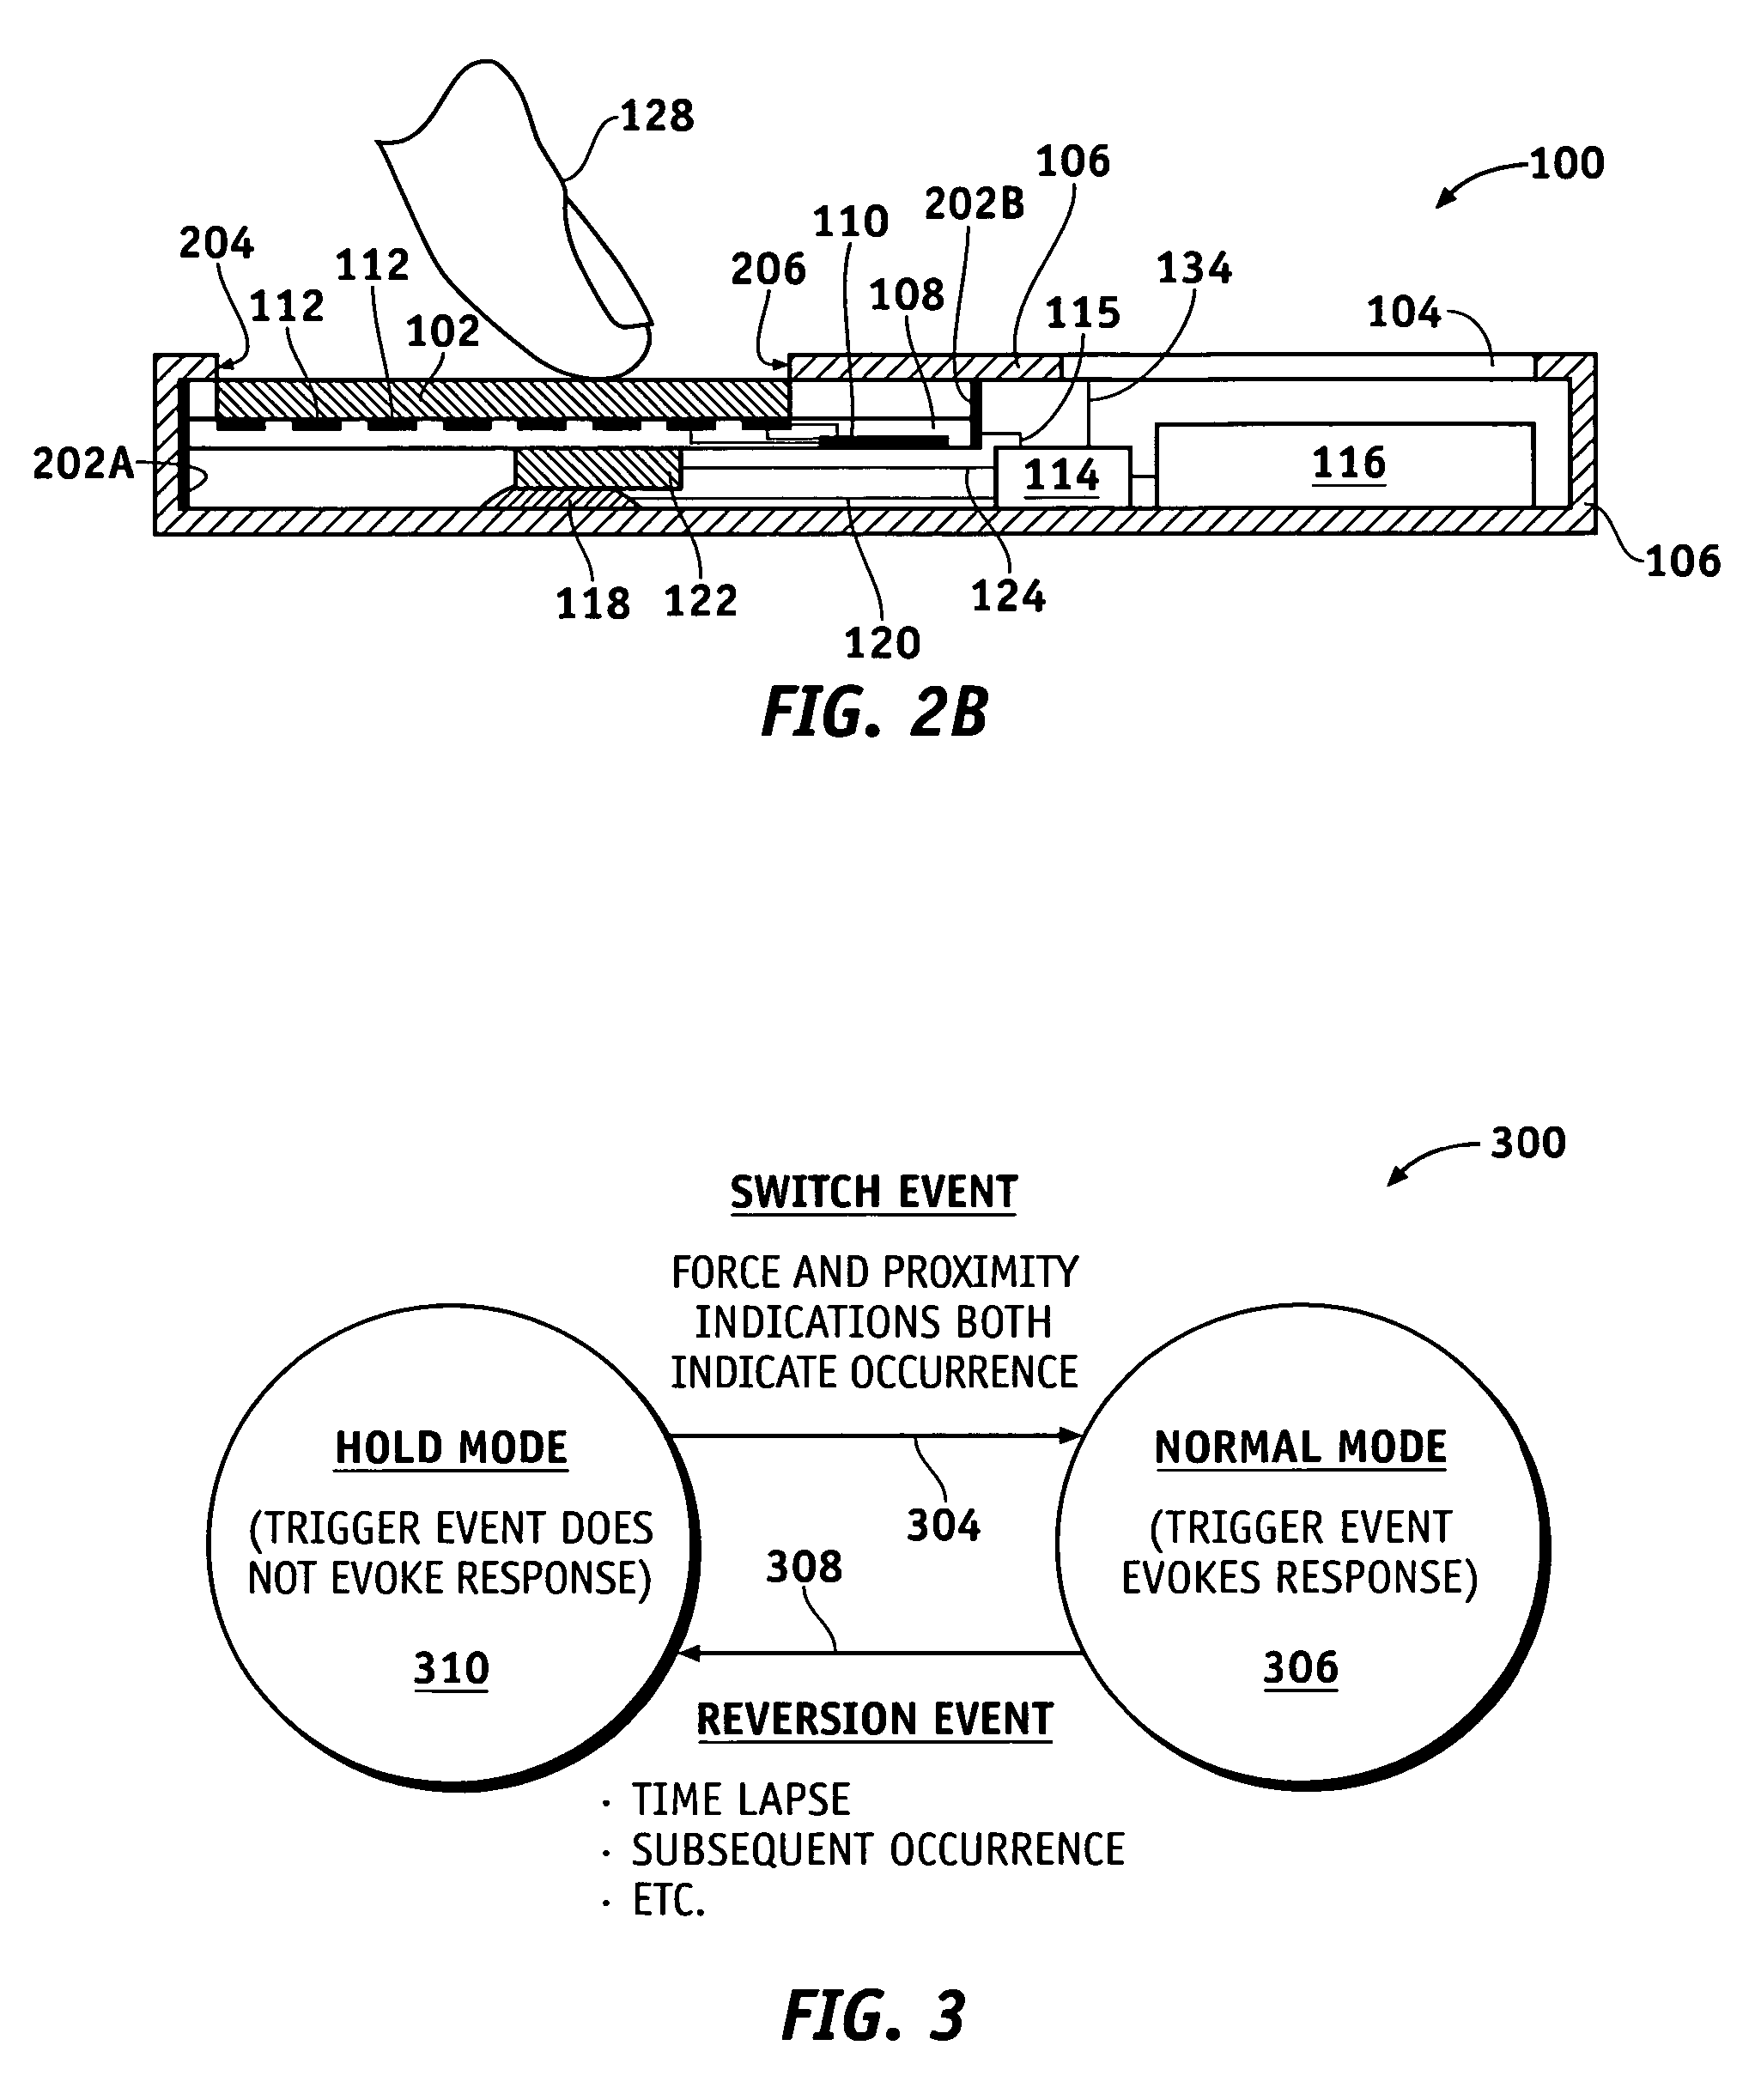 Methods and systems for implementing modal changes in a device in response to proximity and force indications